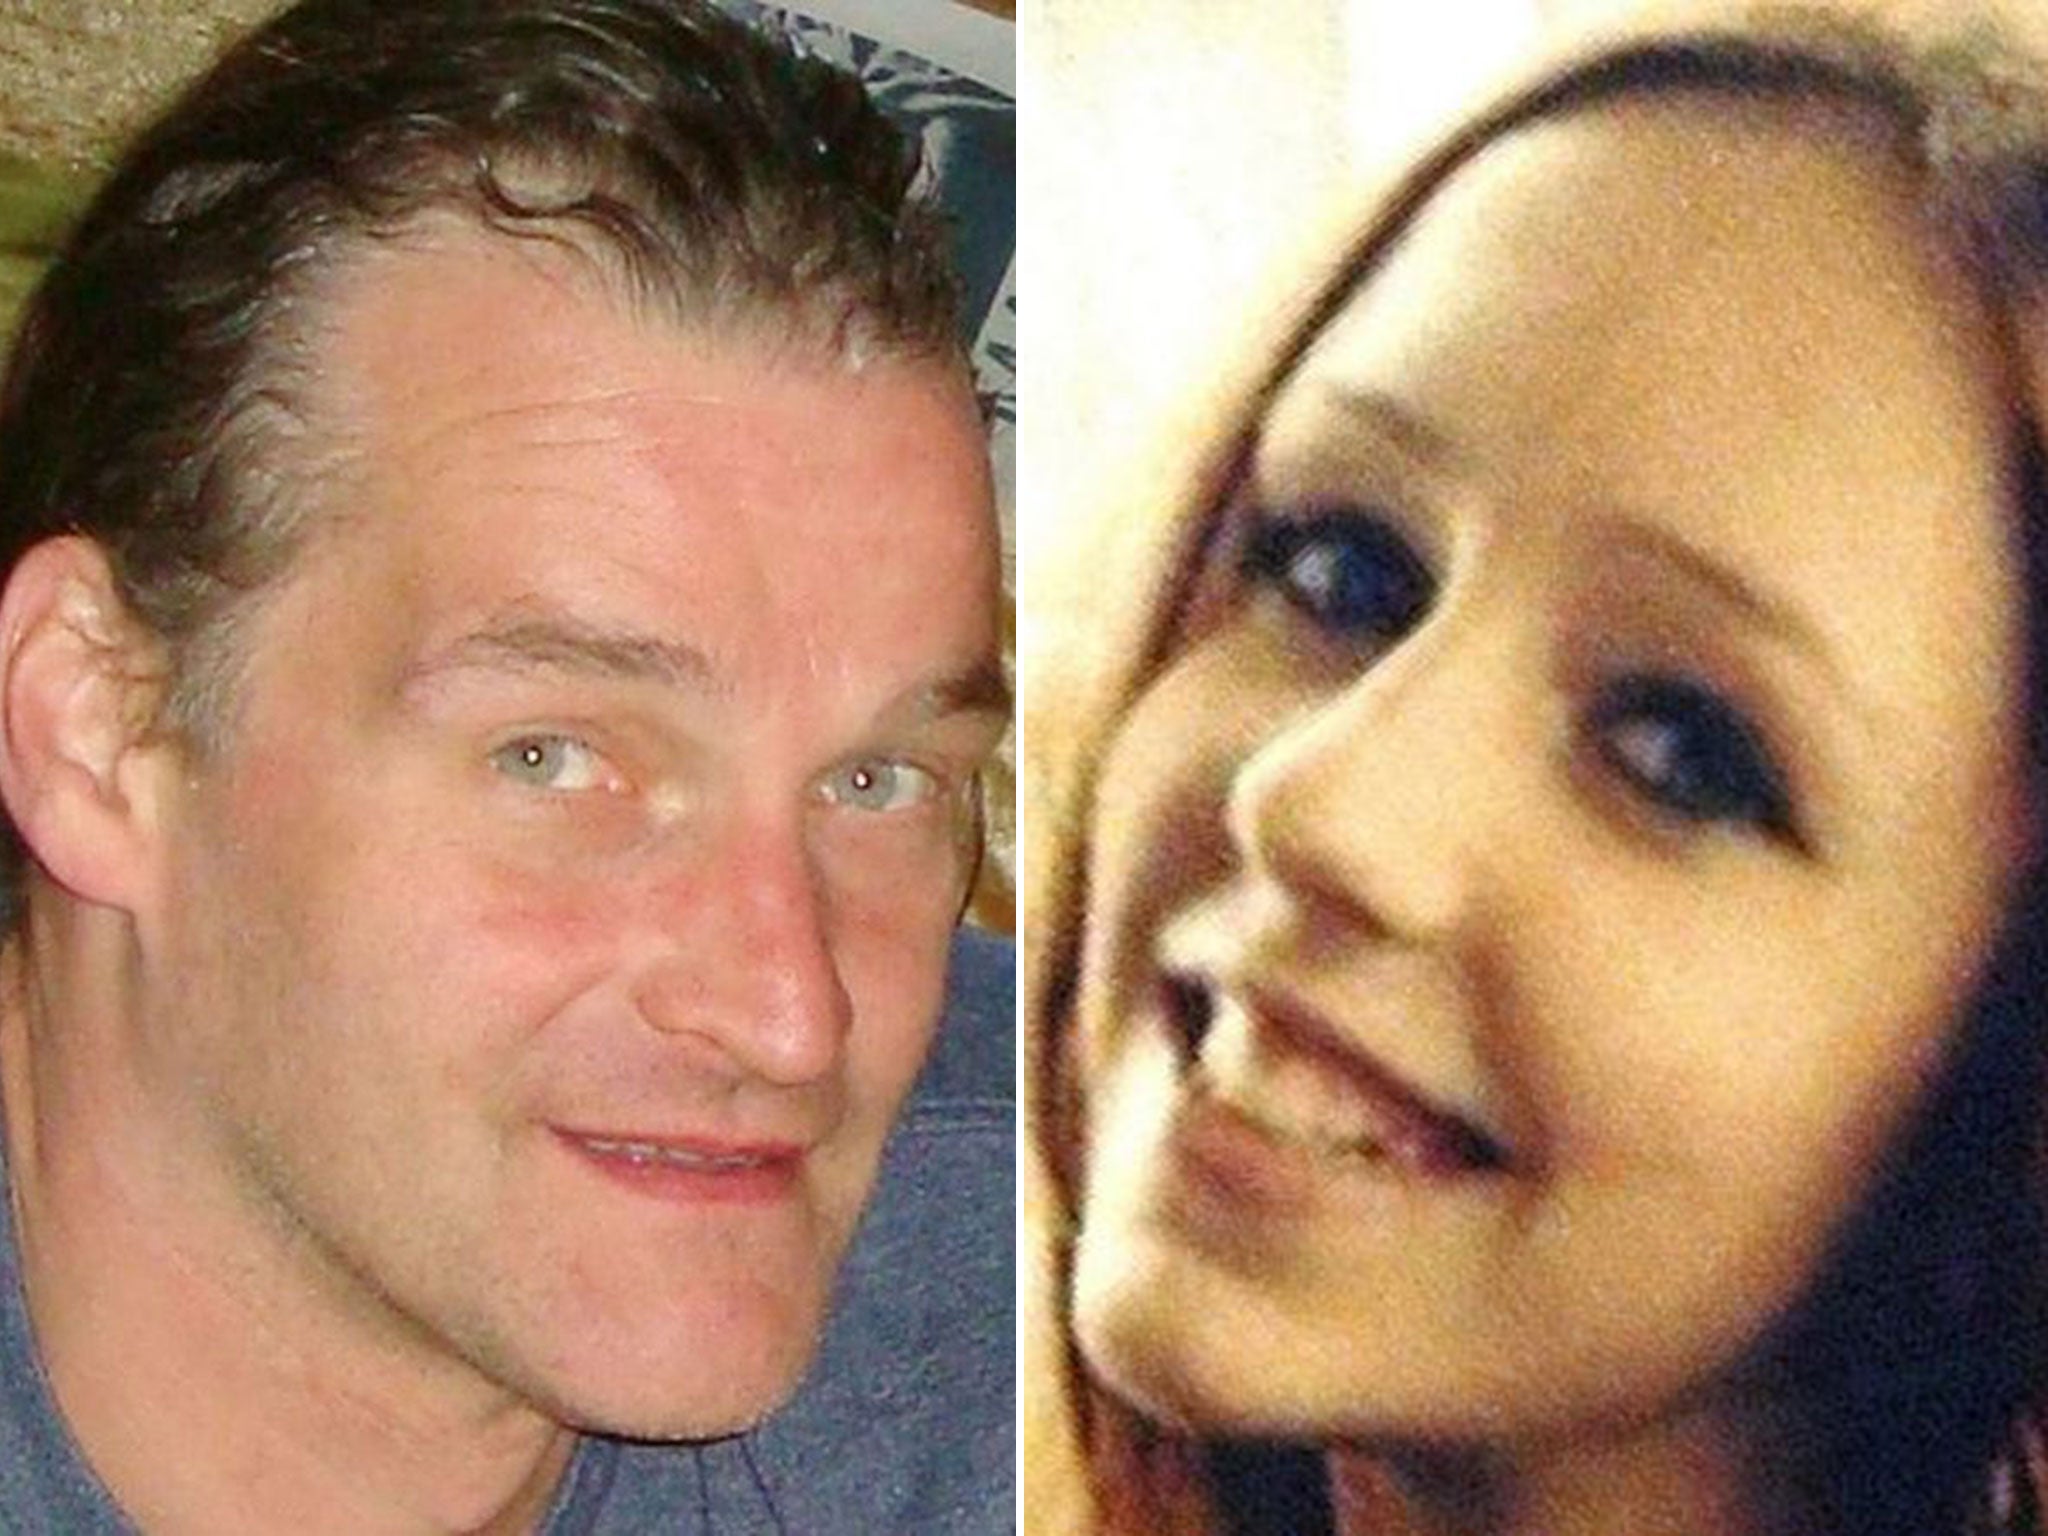 Arnis Zalkalns travelled to Britain in 2007. The Latvian is the prime suspect in the investigation into missing teenager Alice Gross